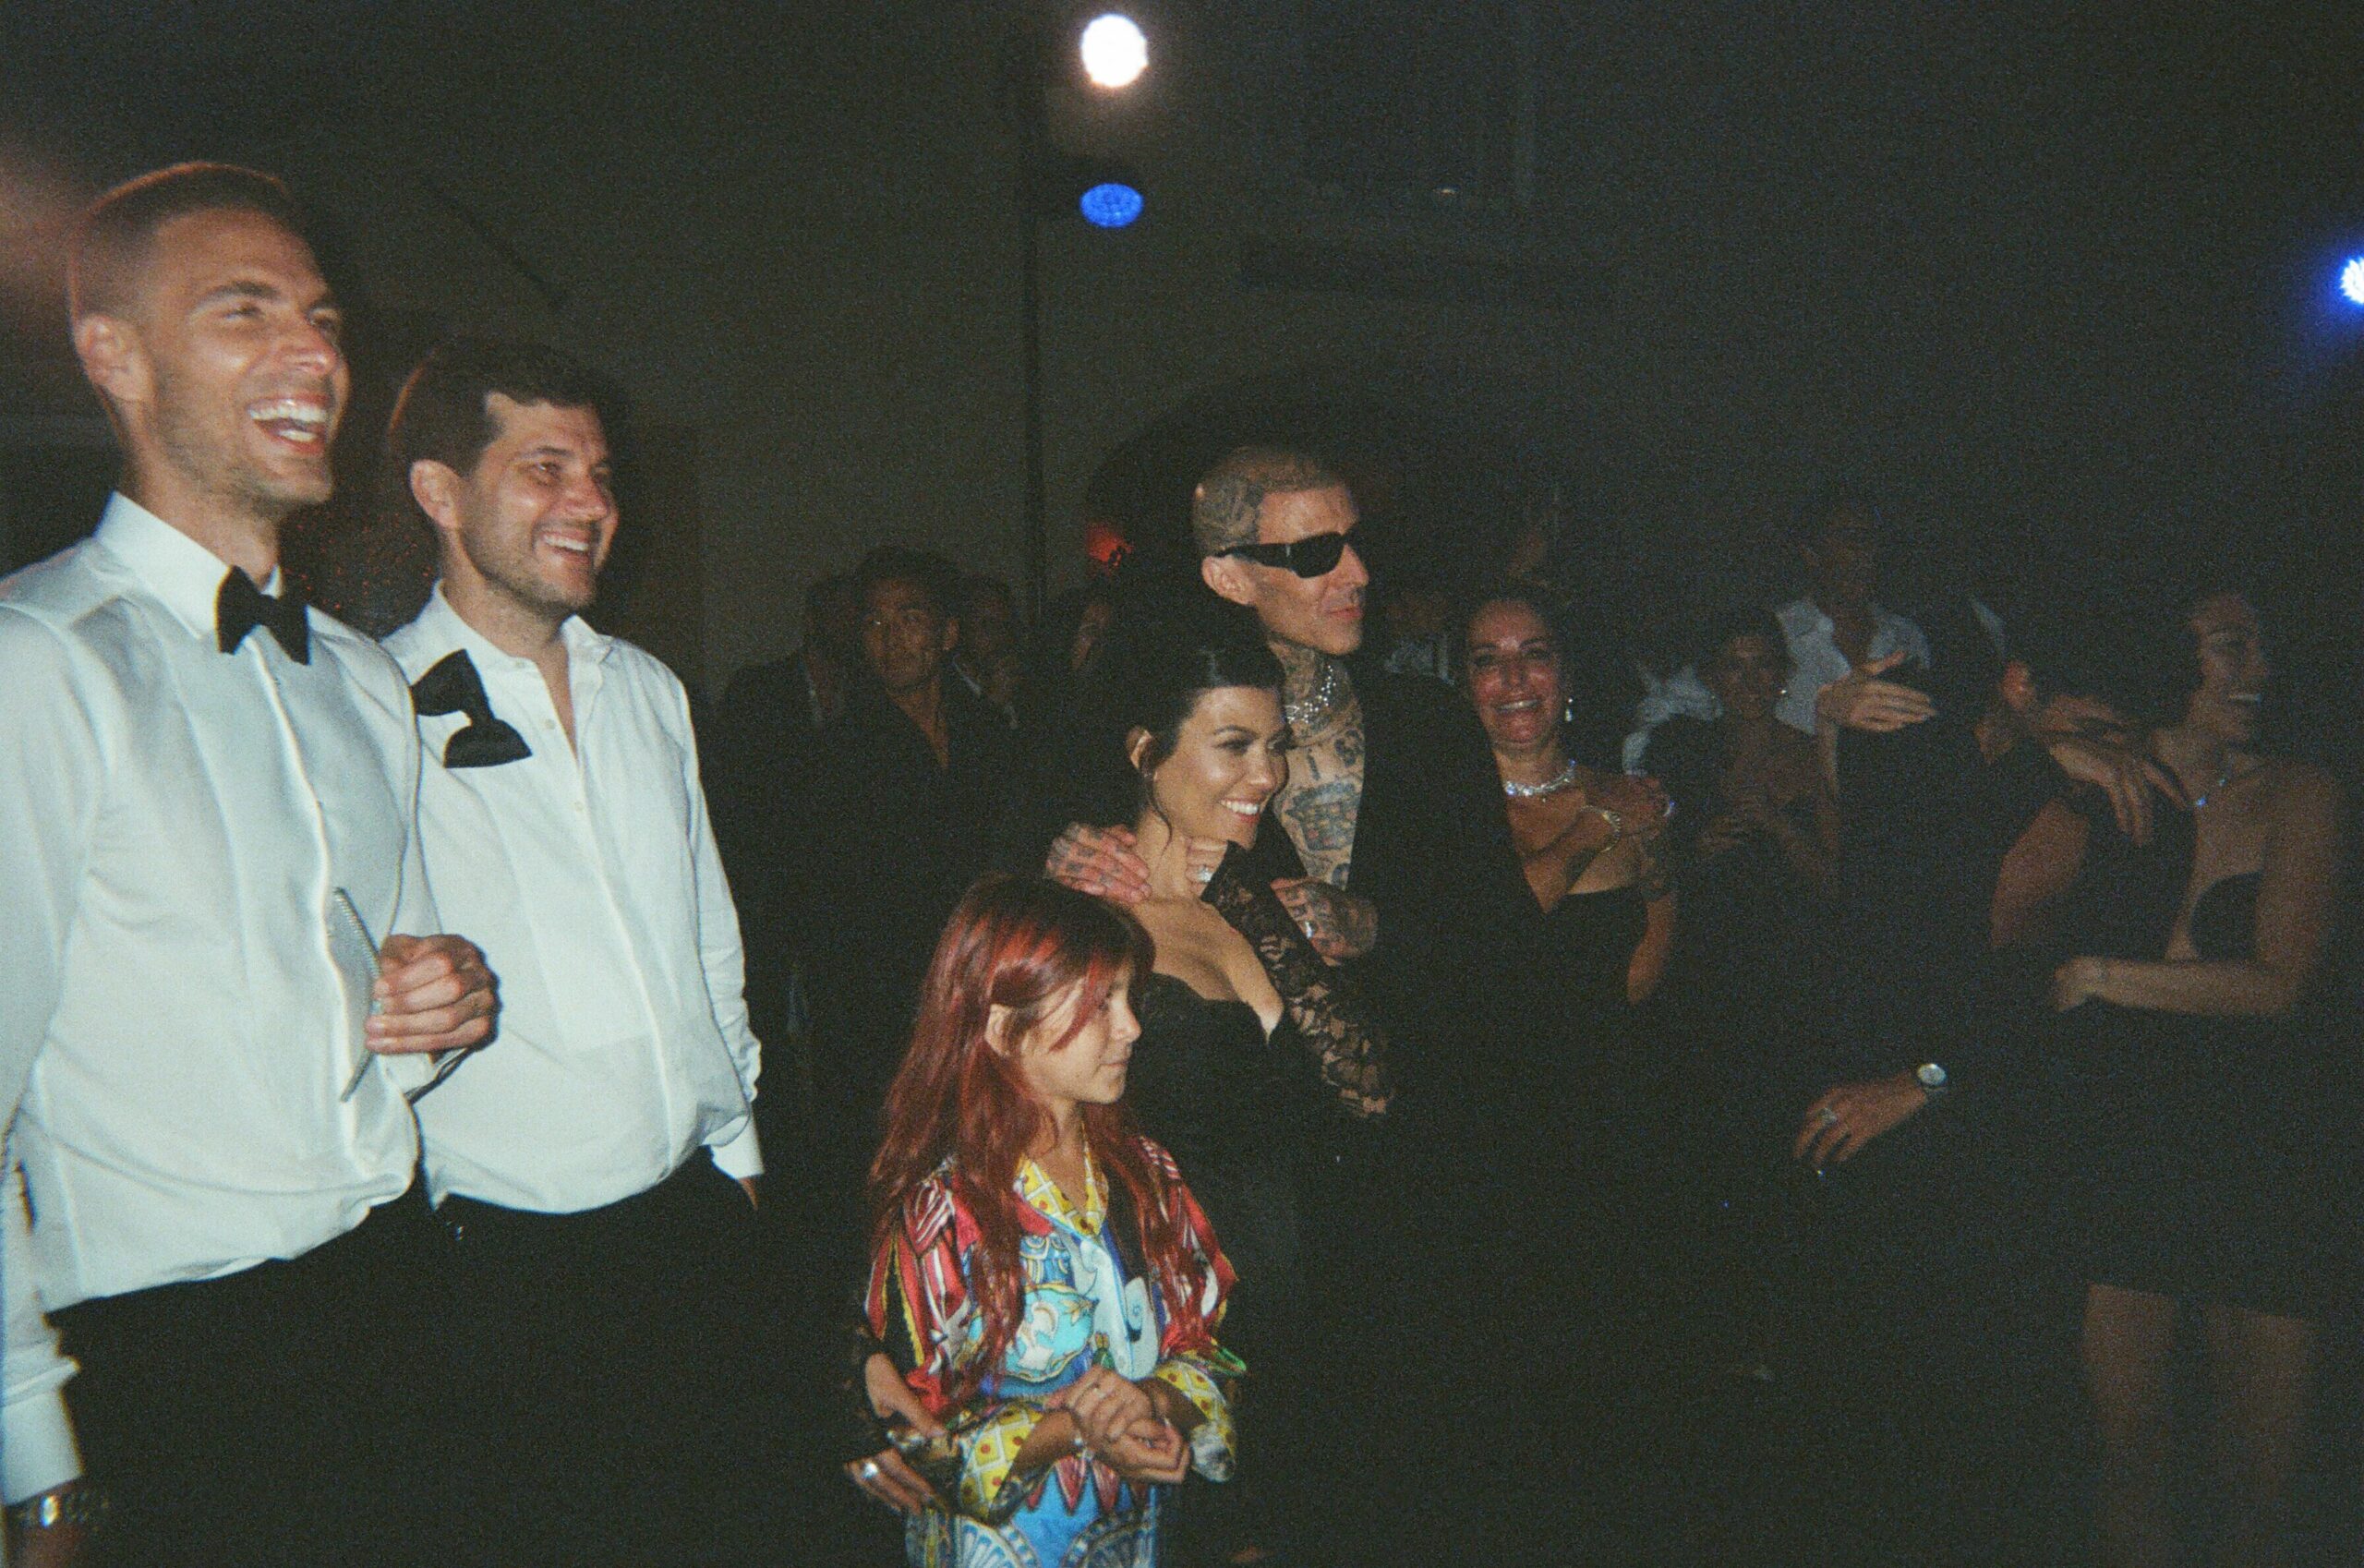 Kourtney Kardashian Barker and Travis Barker With Family and Wedding Guest